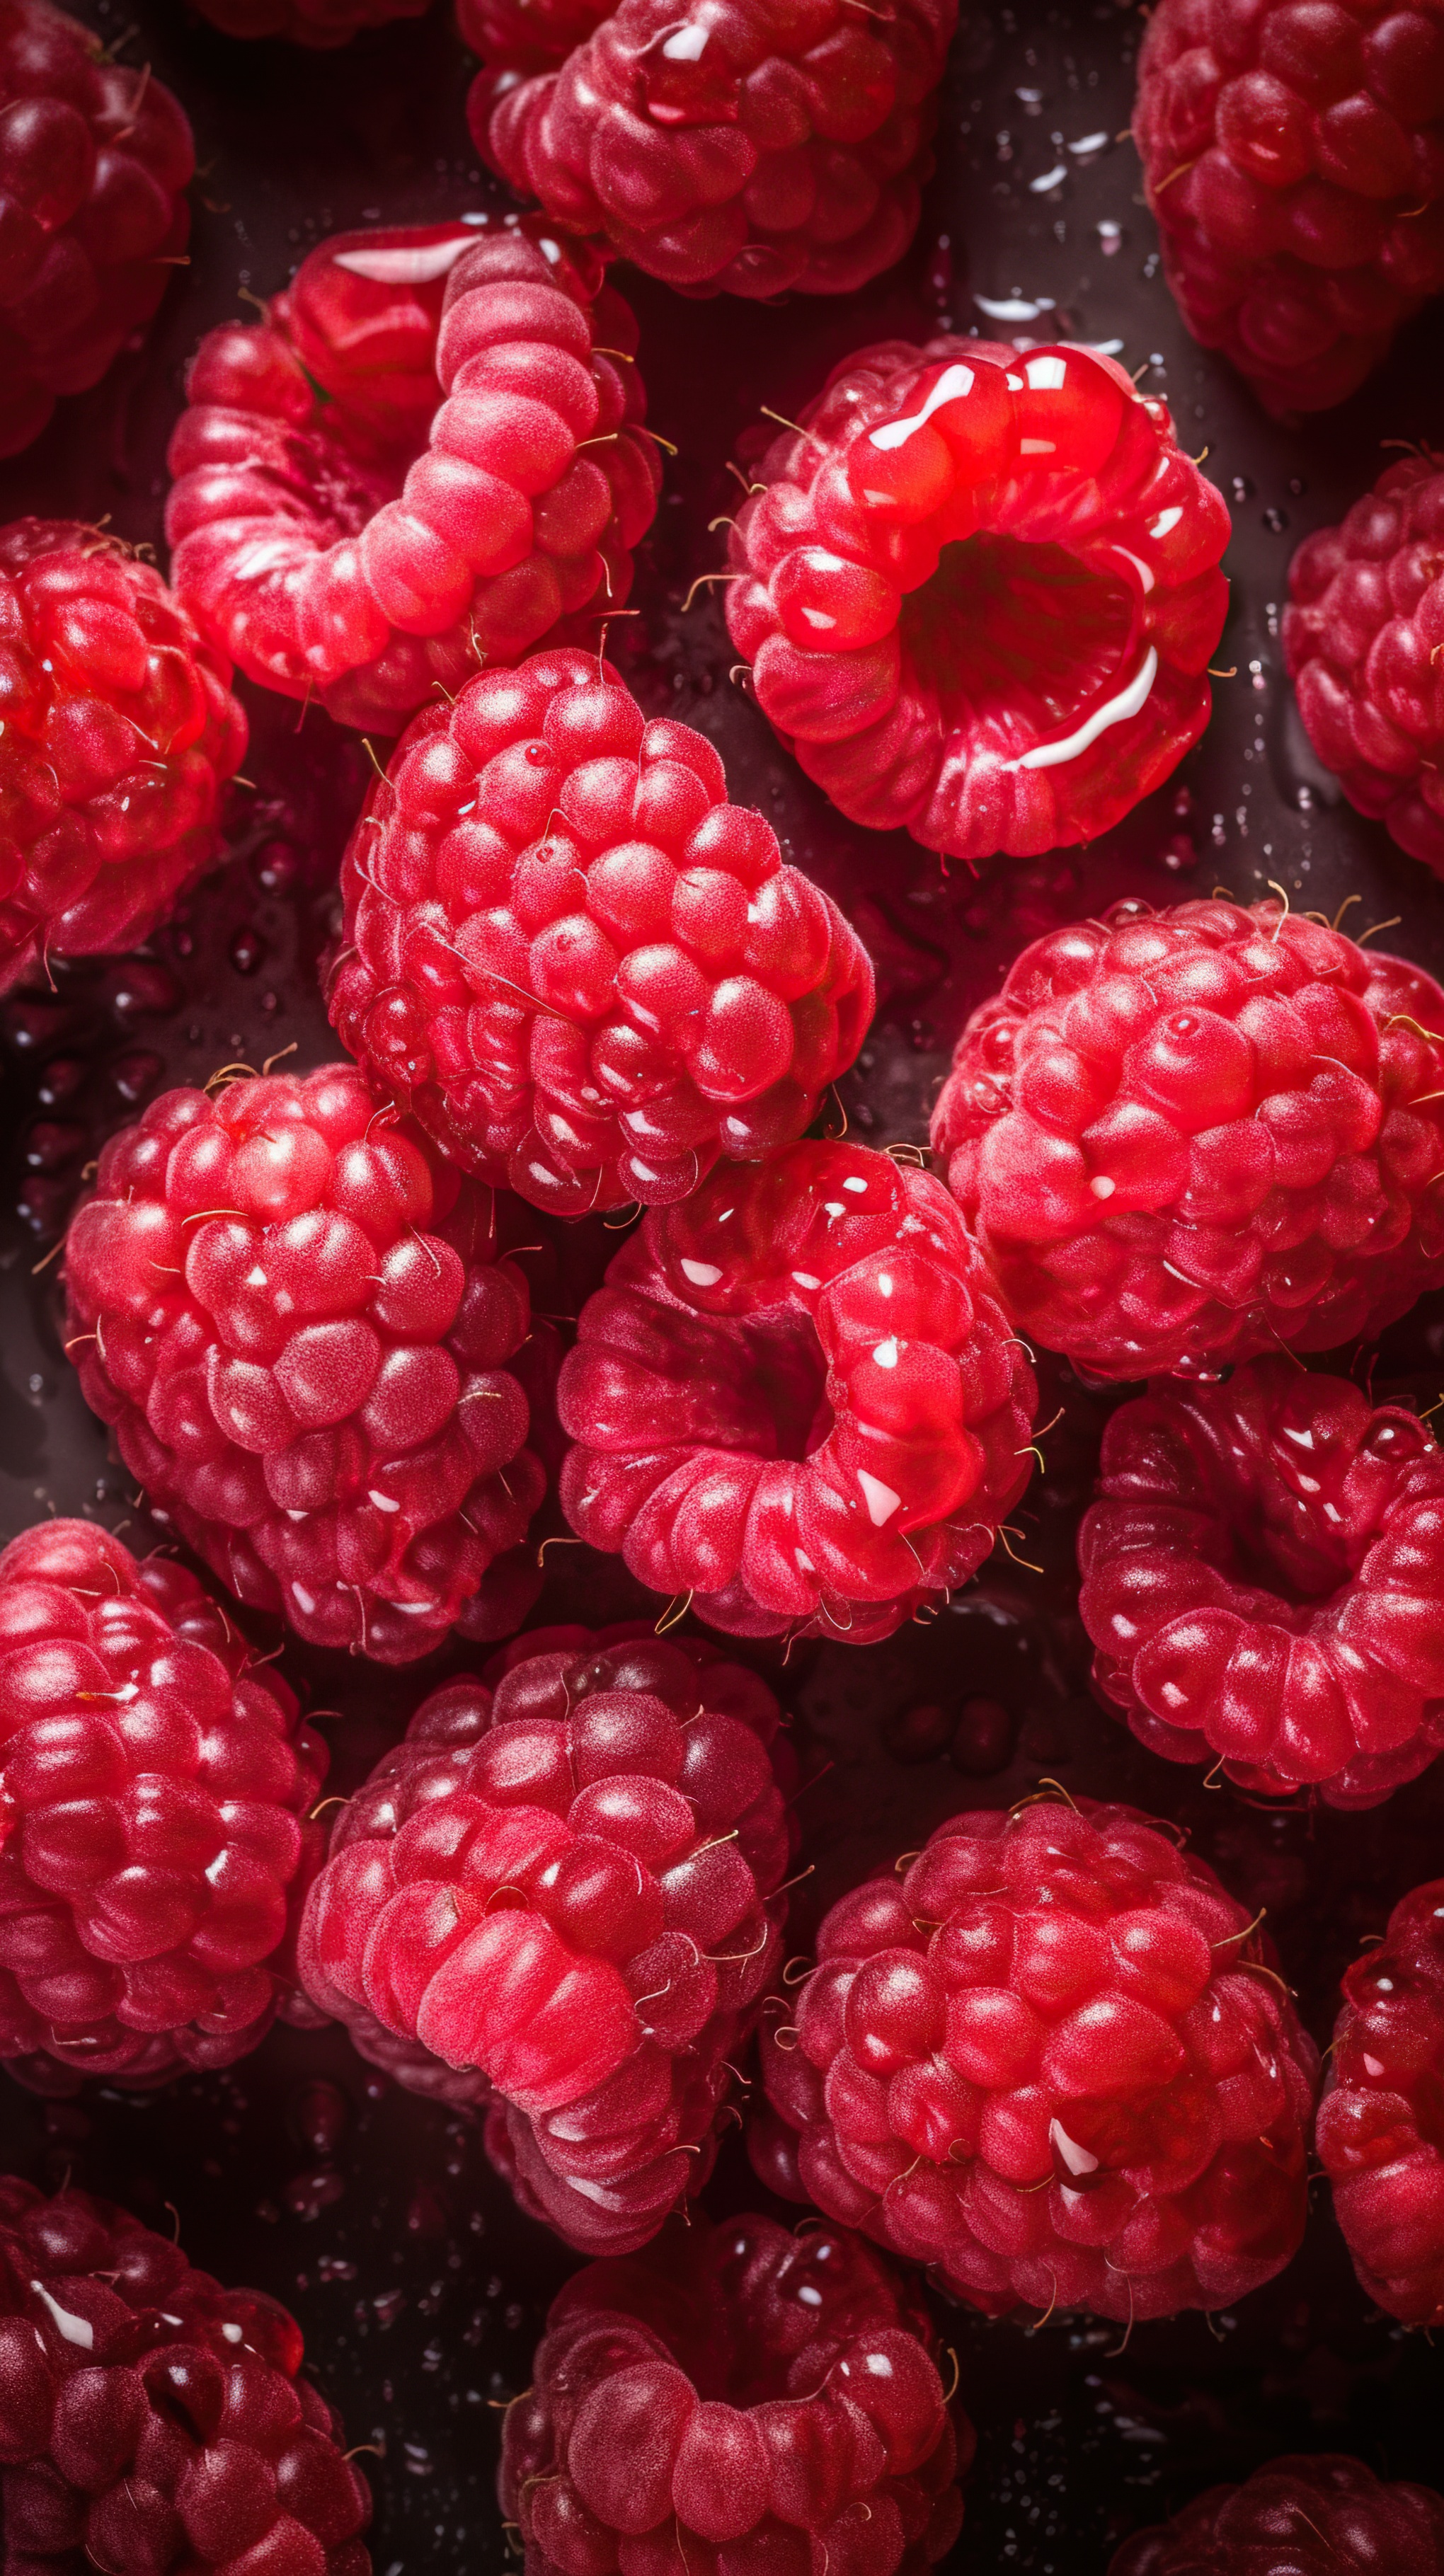 Fresh Raspberries with Water Droplets on Dark Background